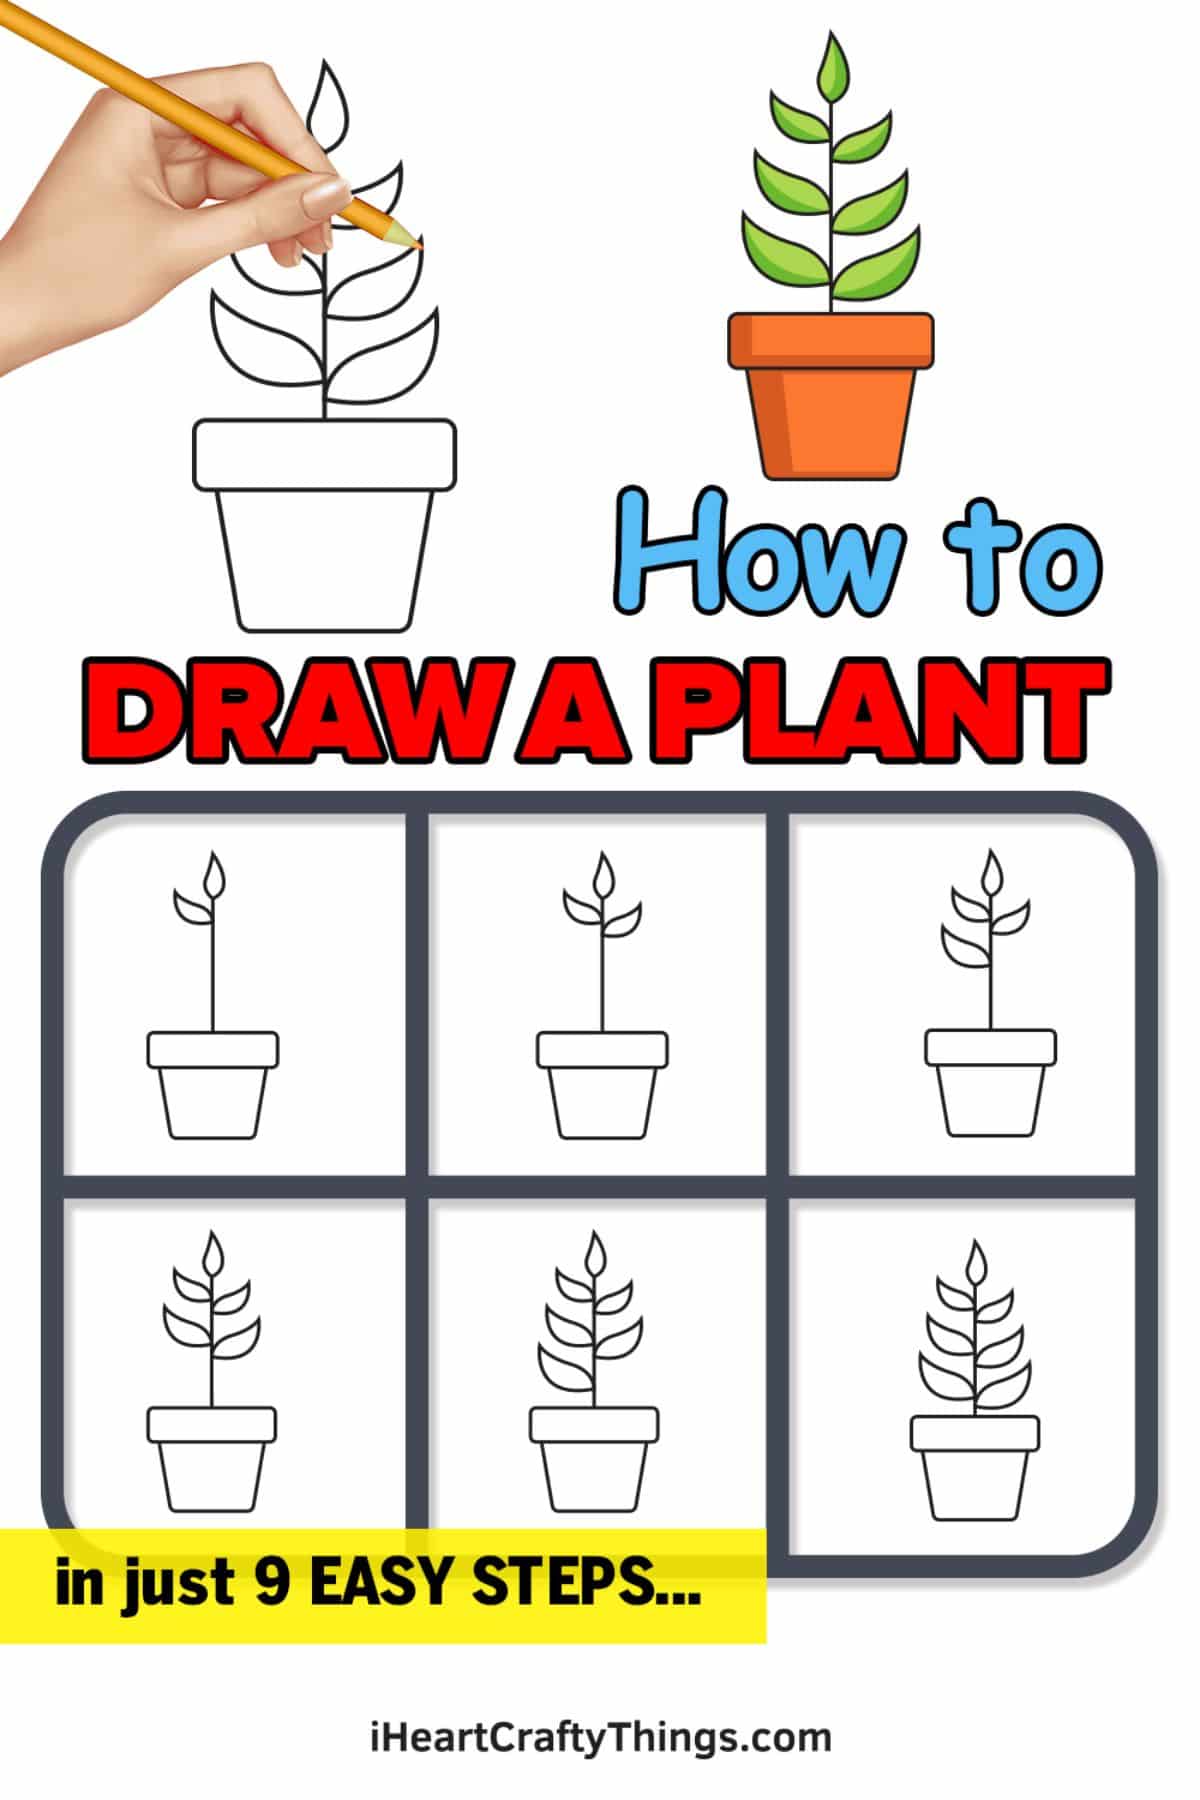 How to draw a plant on a pot poster.